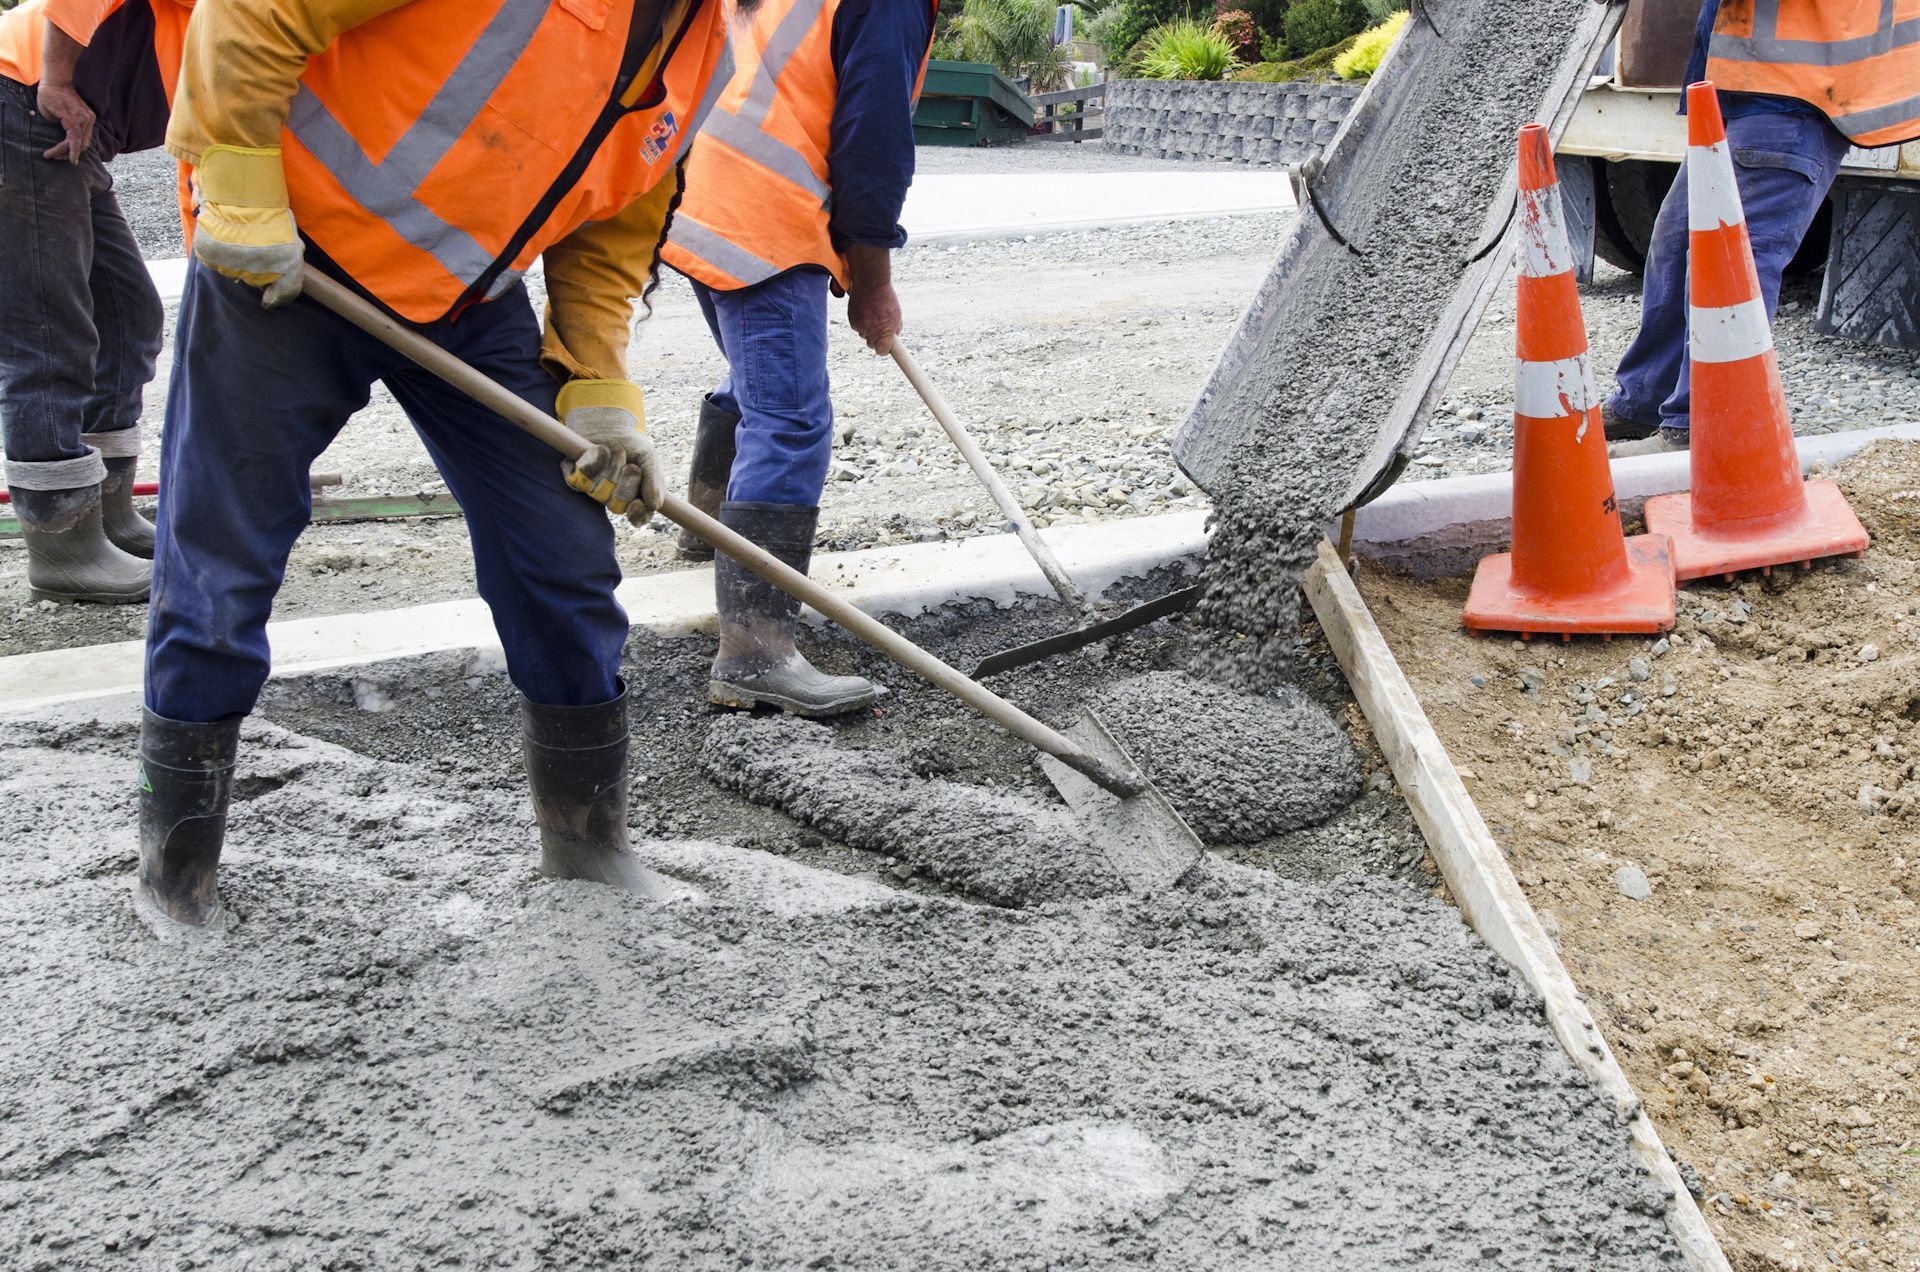 A group of construction workers are pouring concrete on a sidewalk.